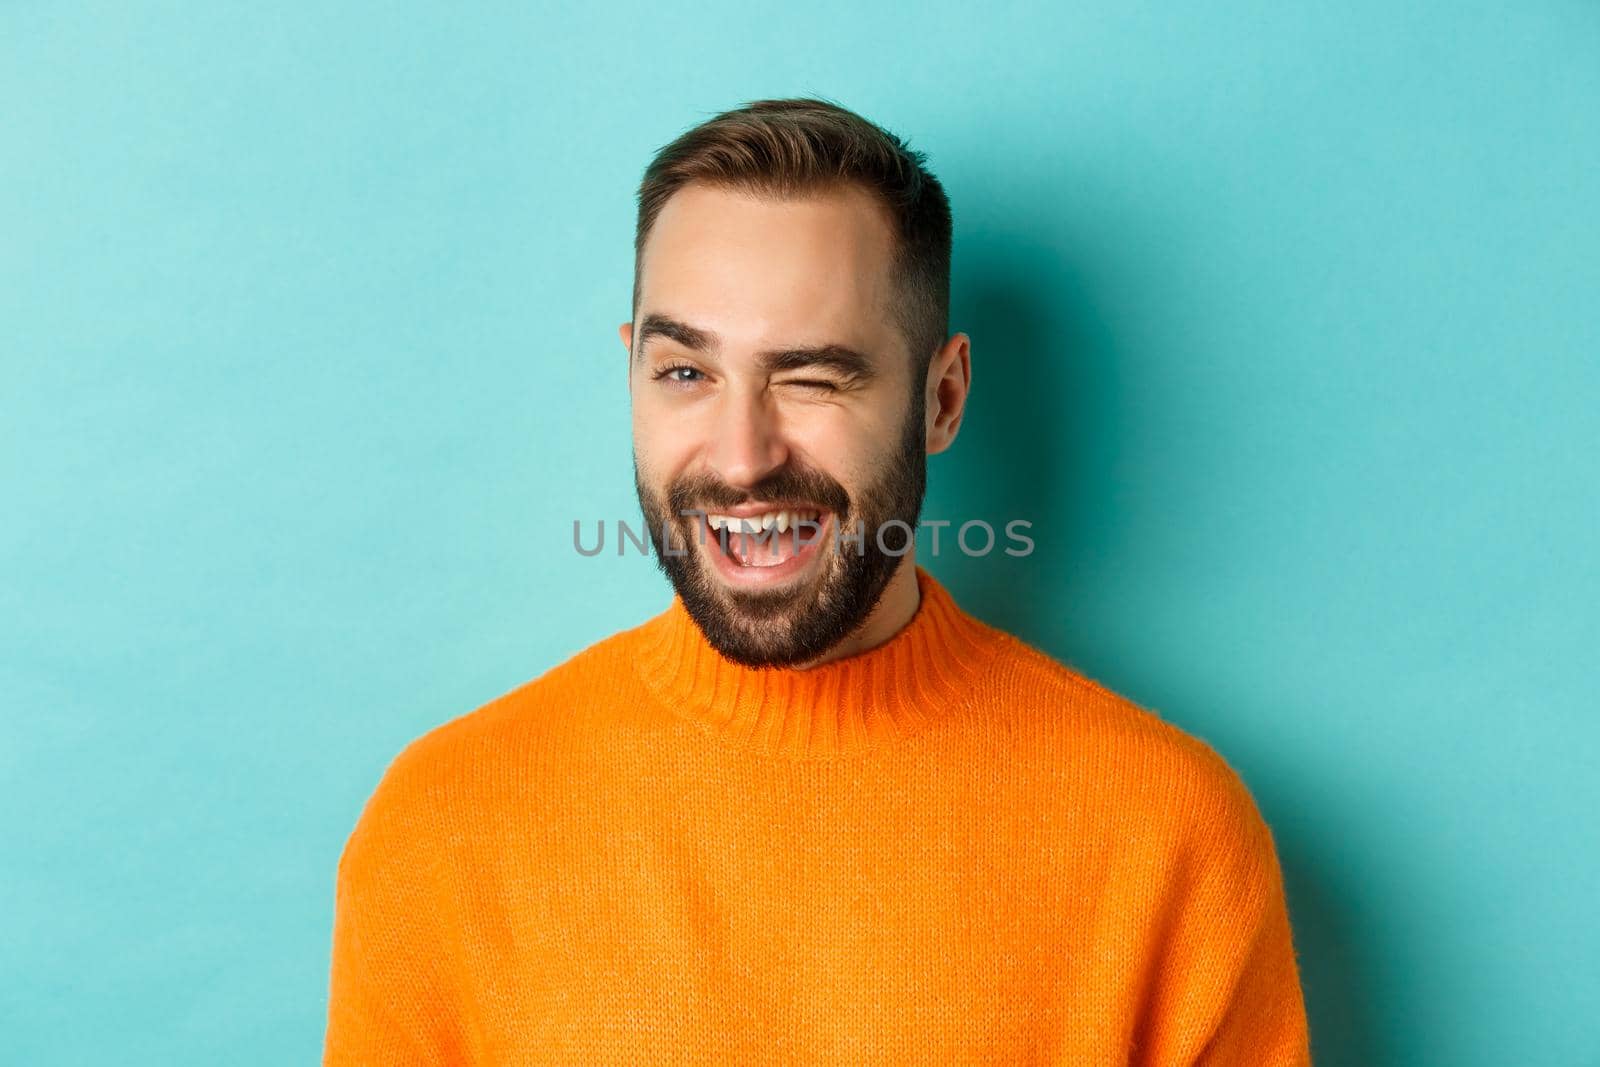 Handsome confident man winking at camera, smiling sassy, standing in orange sweater against blue background.